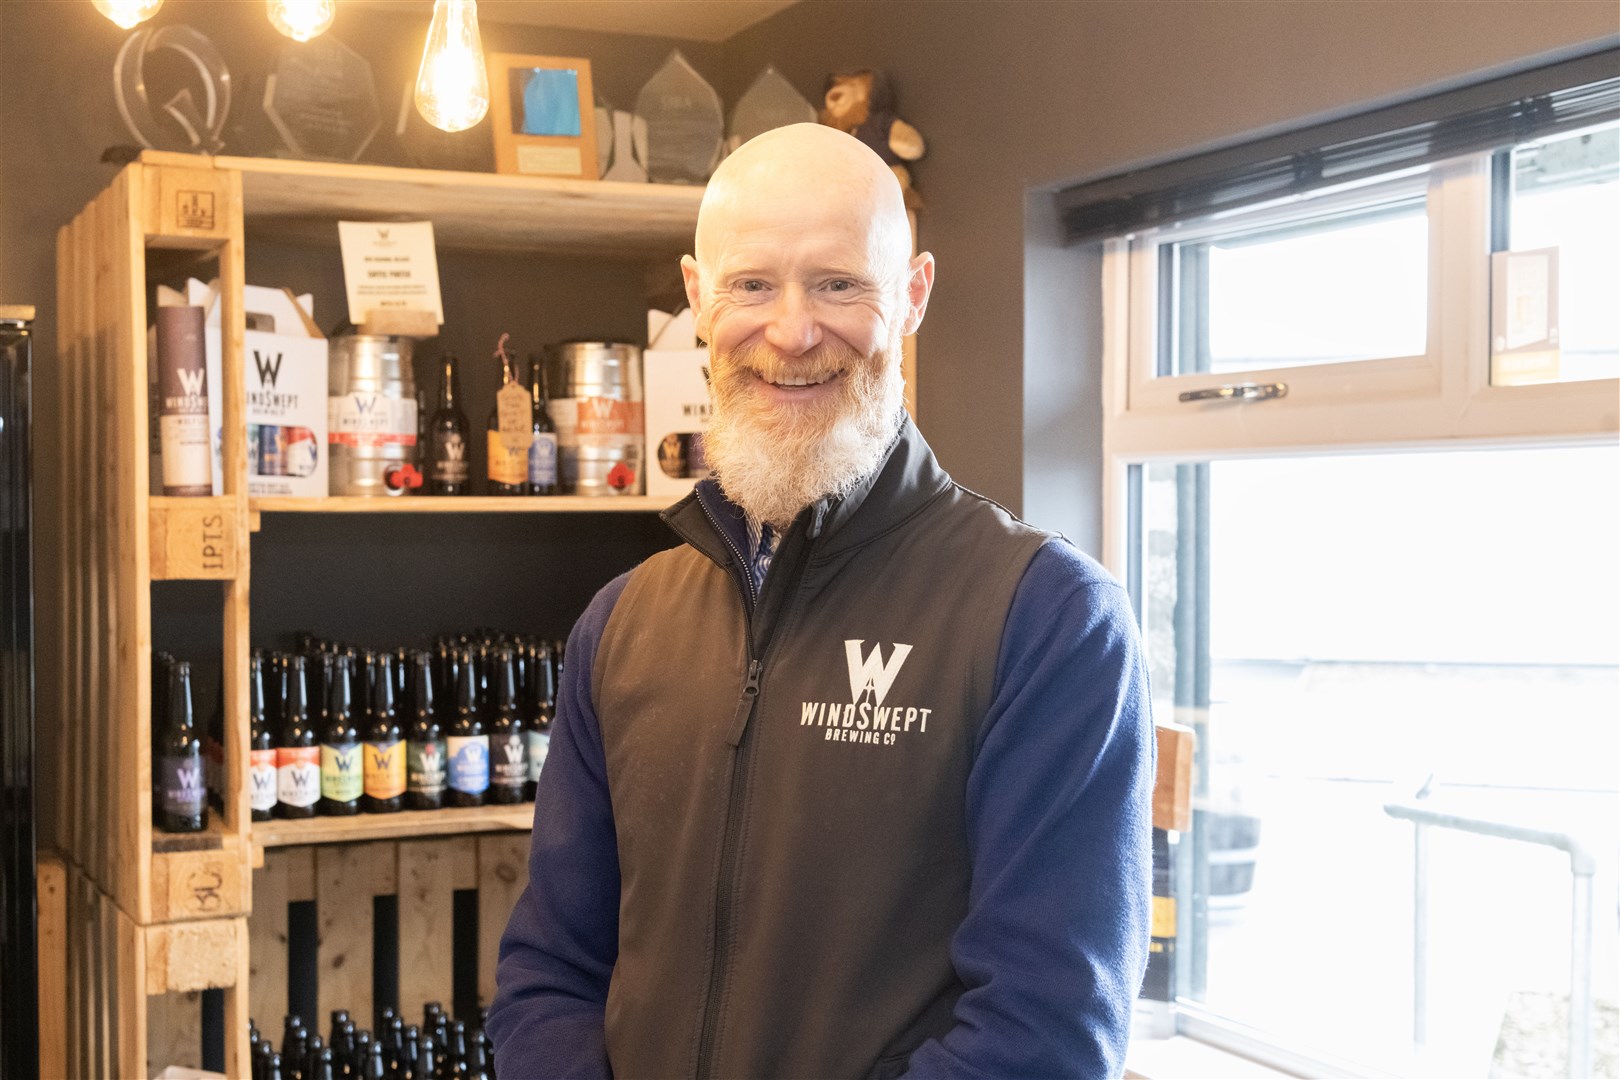 Windswept Brewery managing director, Nigel Tiddy. Picture: Beth Taylor